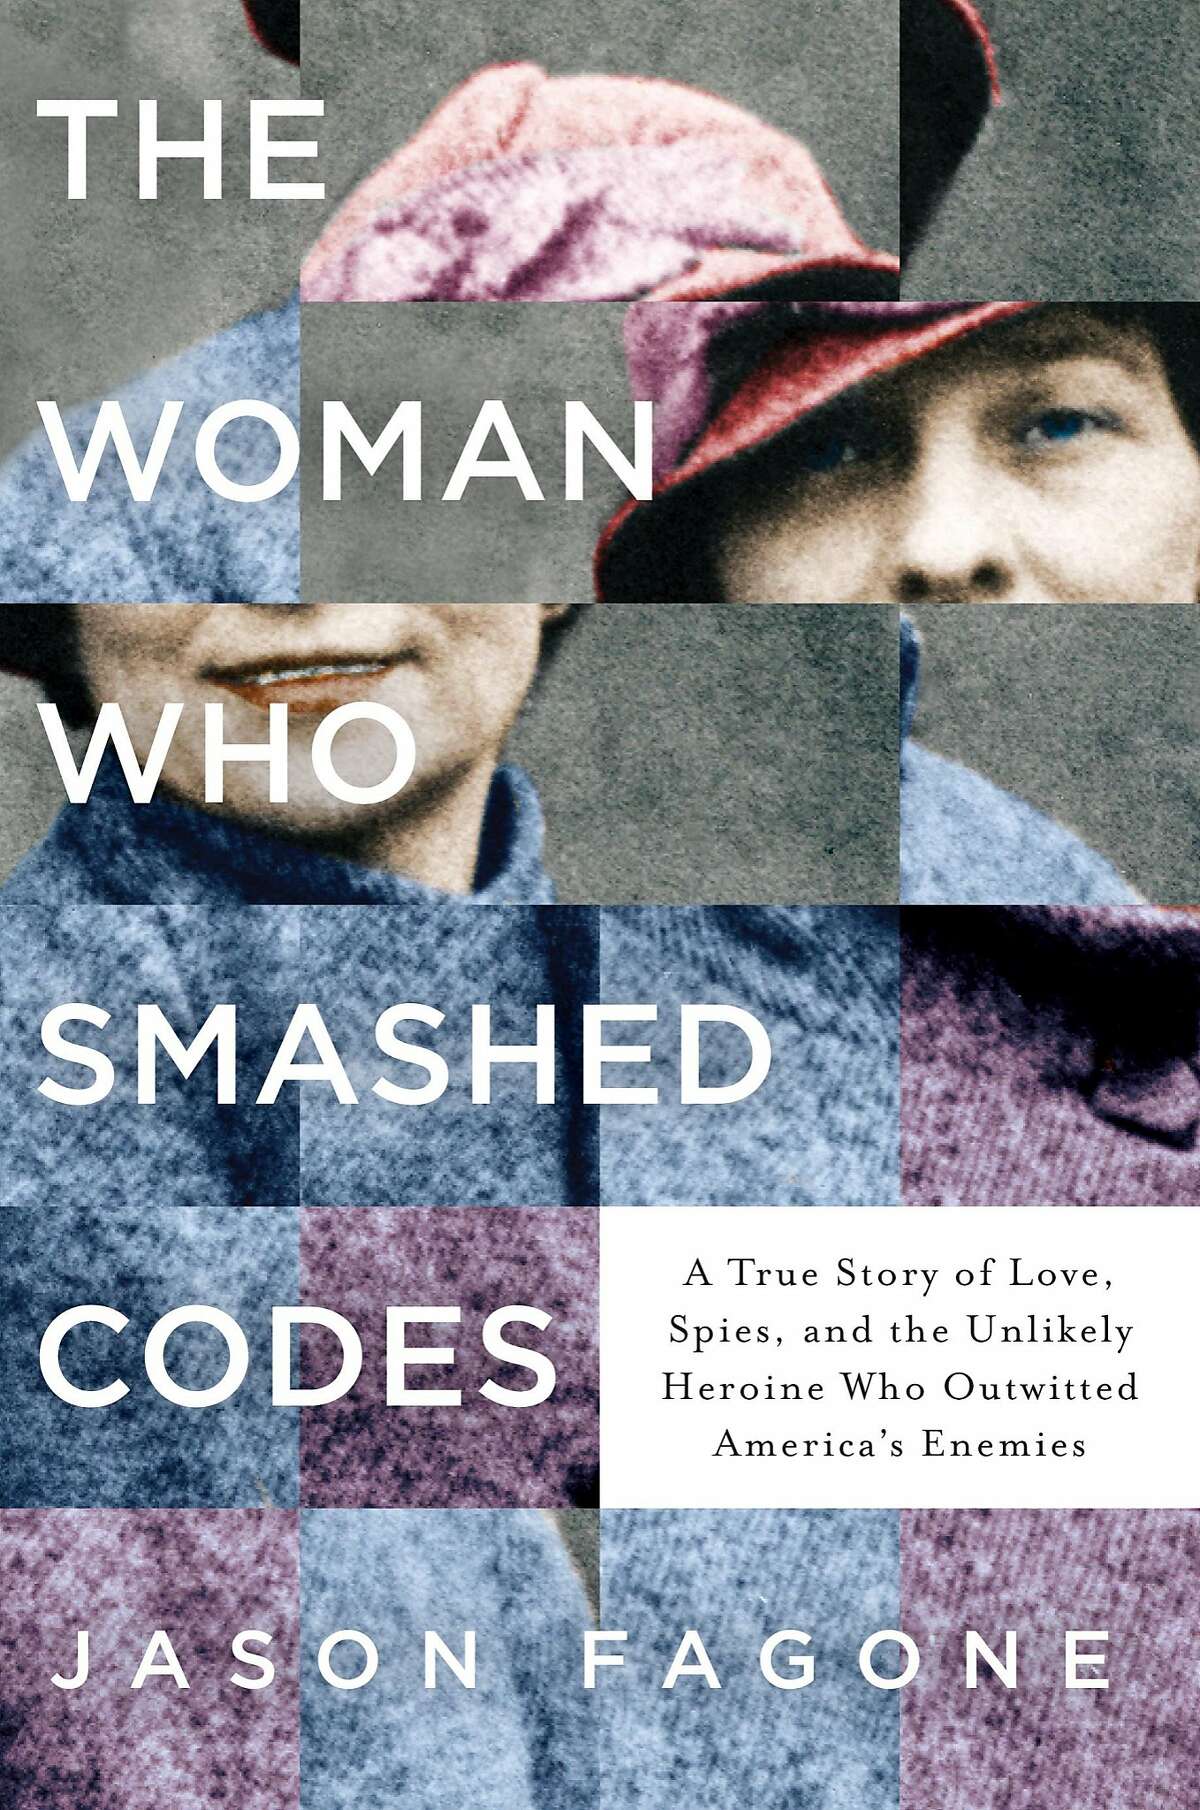 "The Woman Who Smashed Codes"